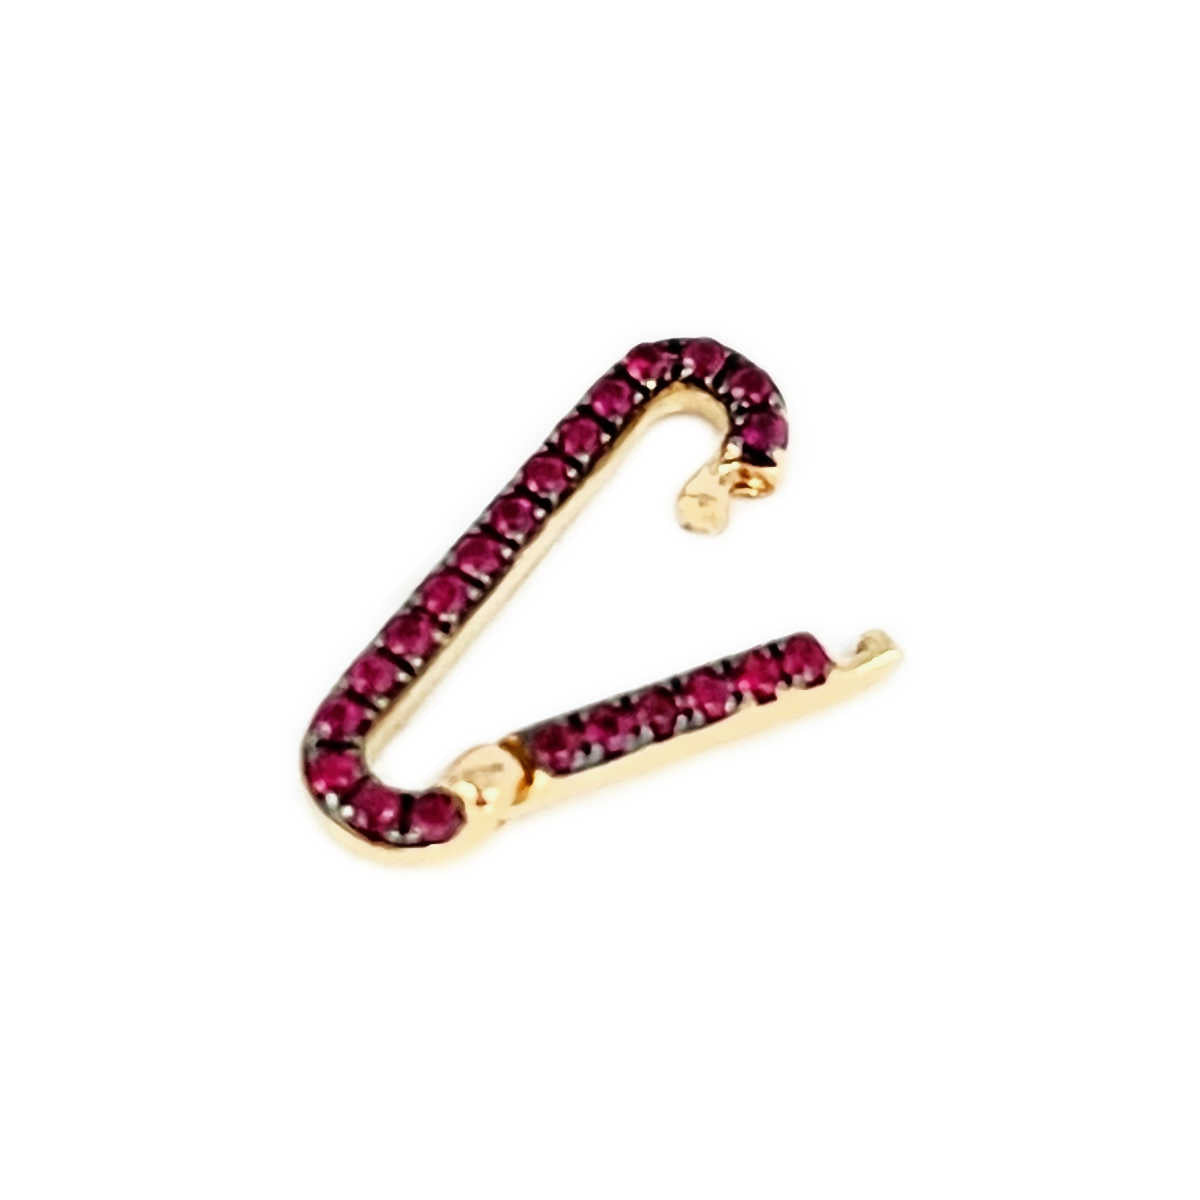 14k Gold Charm Holder with Ruby for Bracelet, Necklace, Pendant | Multiple Charm Clip Connector